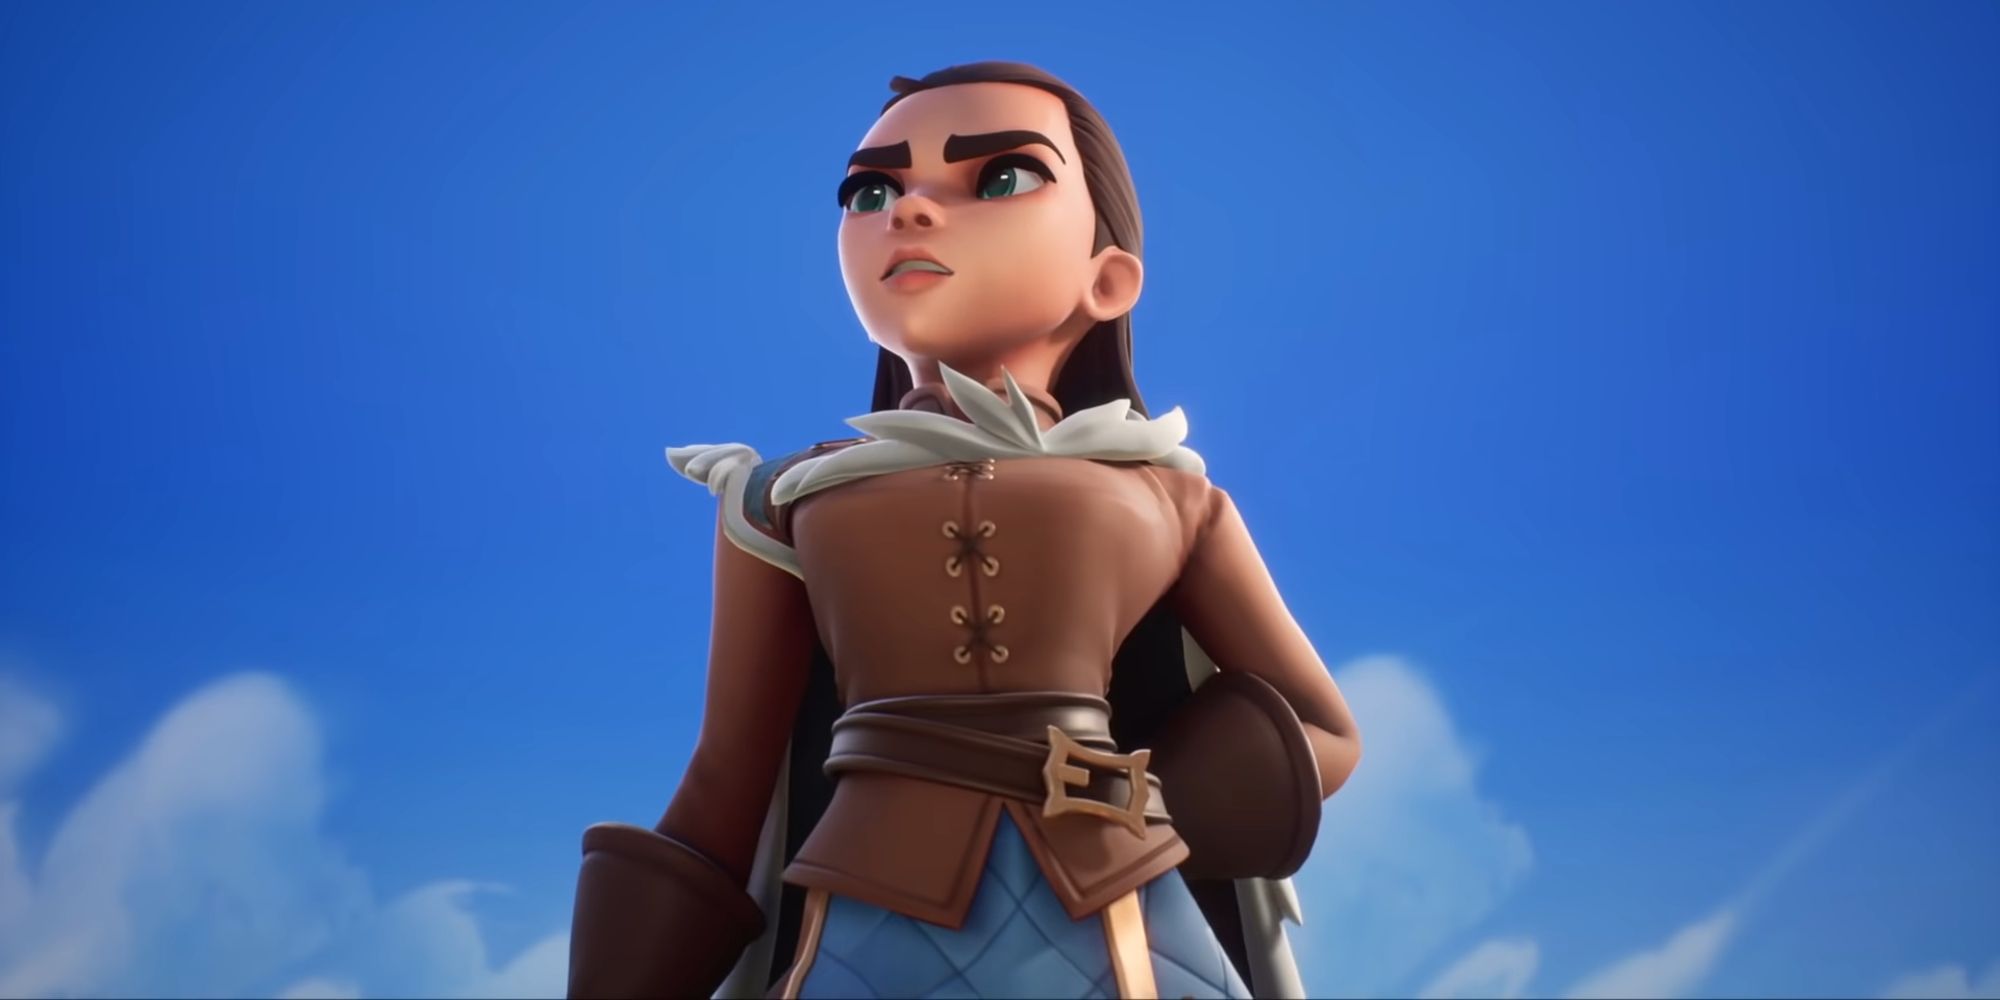 Arya Stark joining the fight in MultiVersus